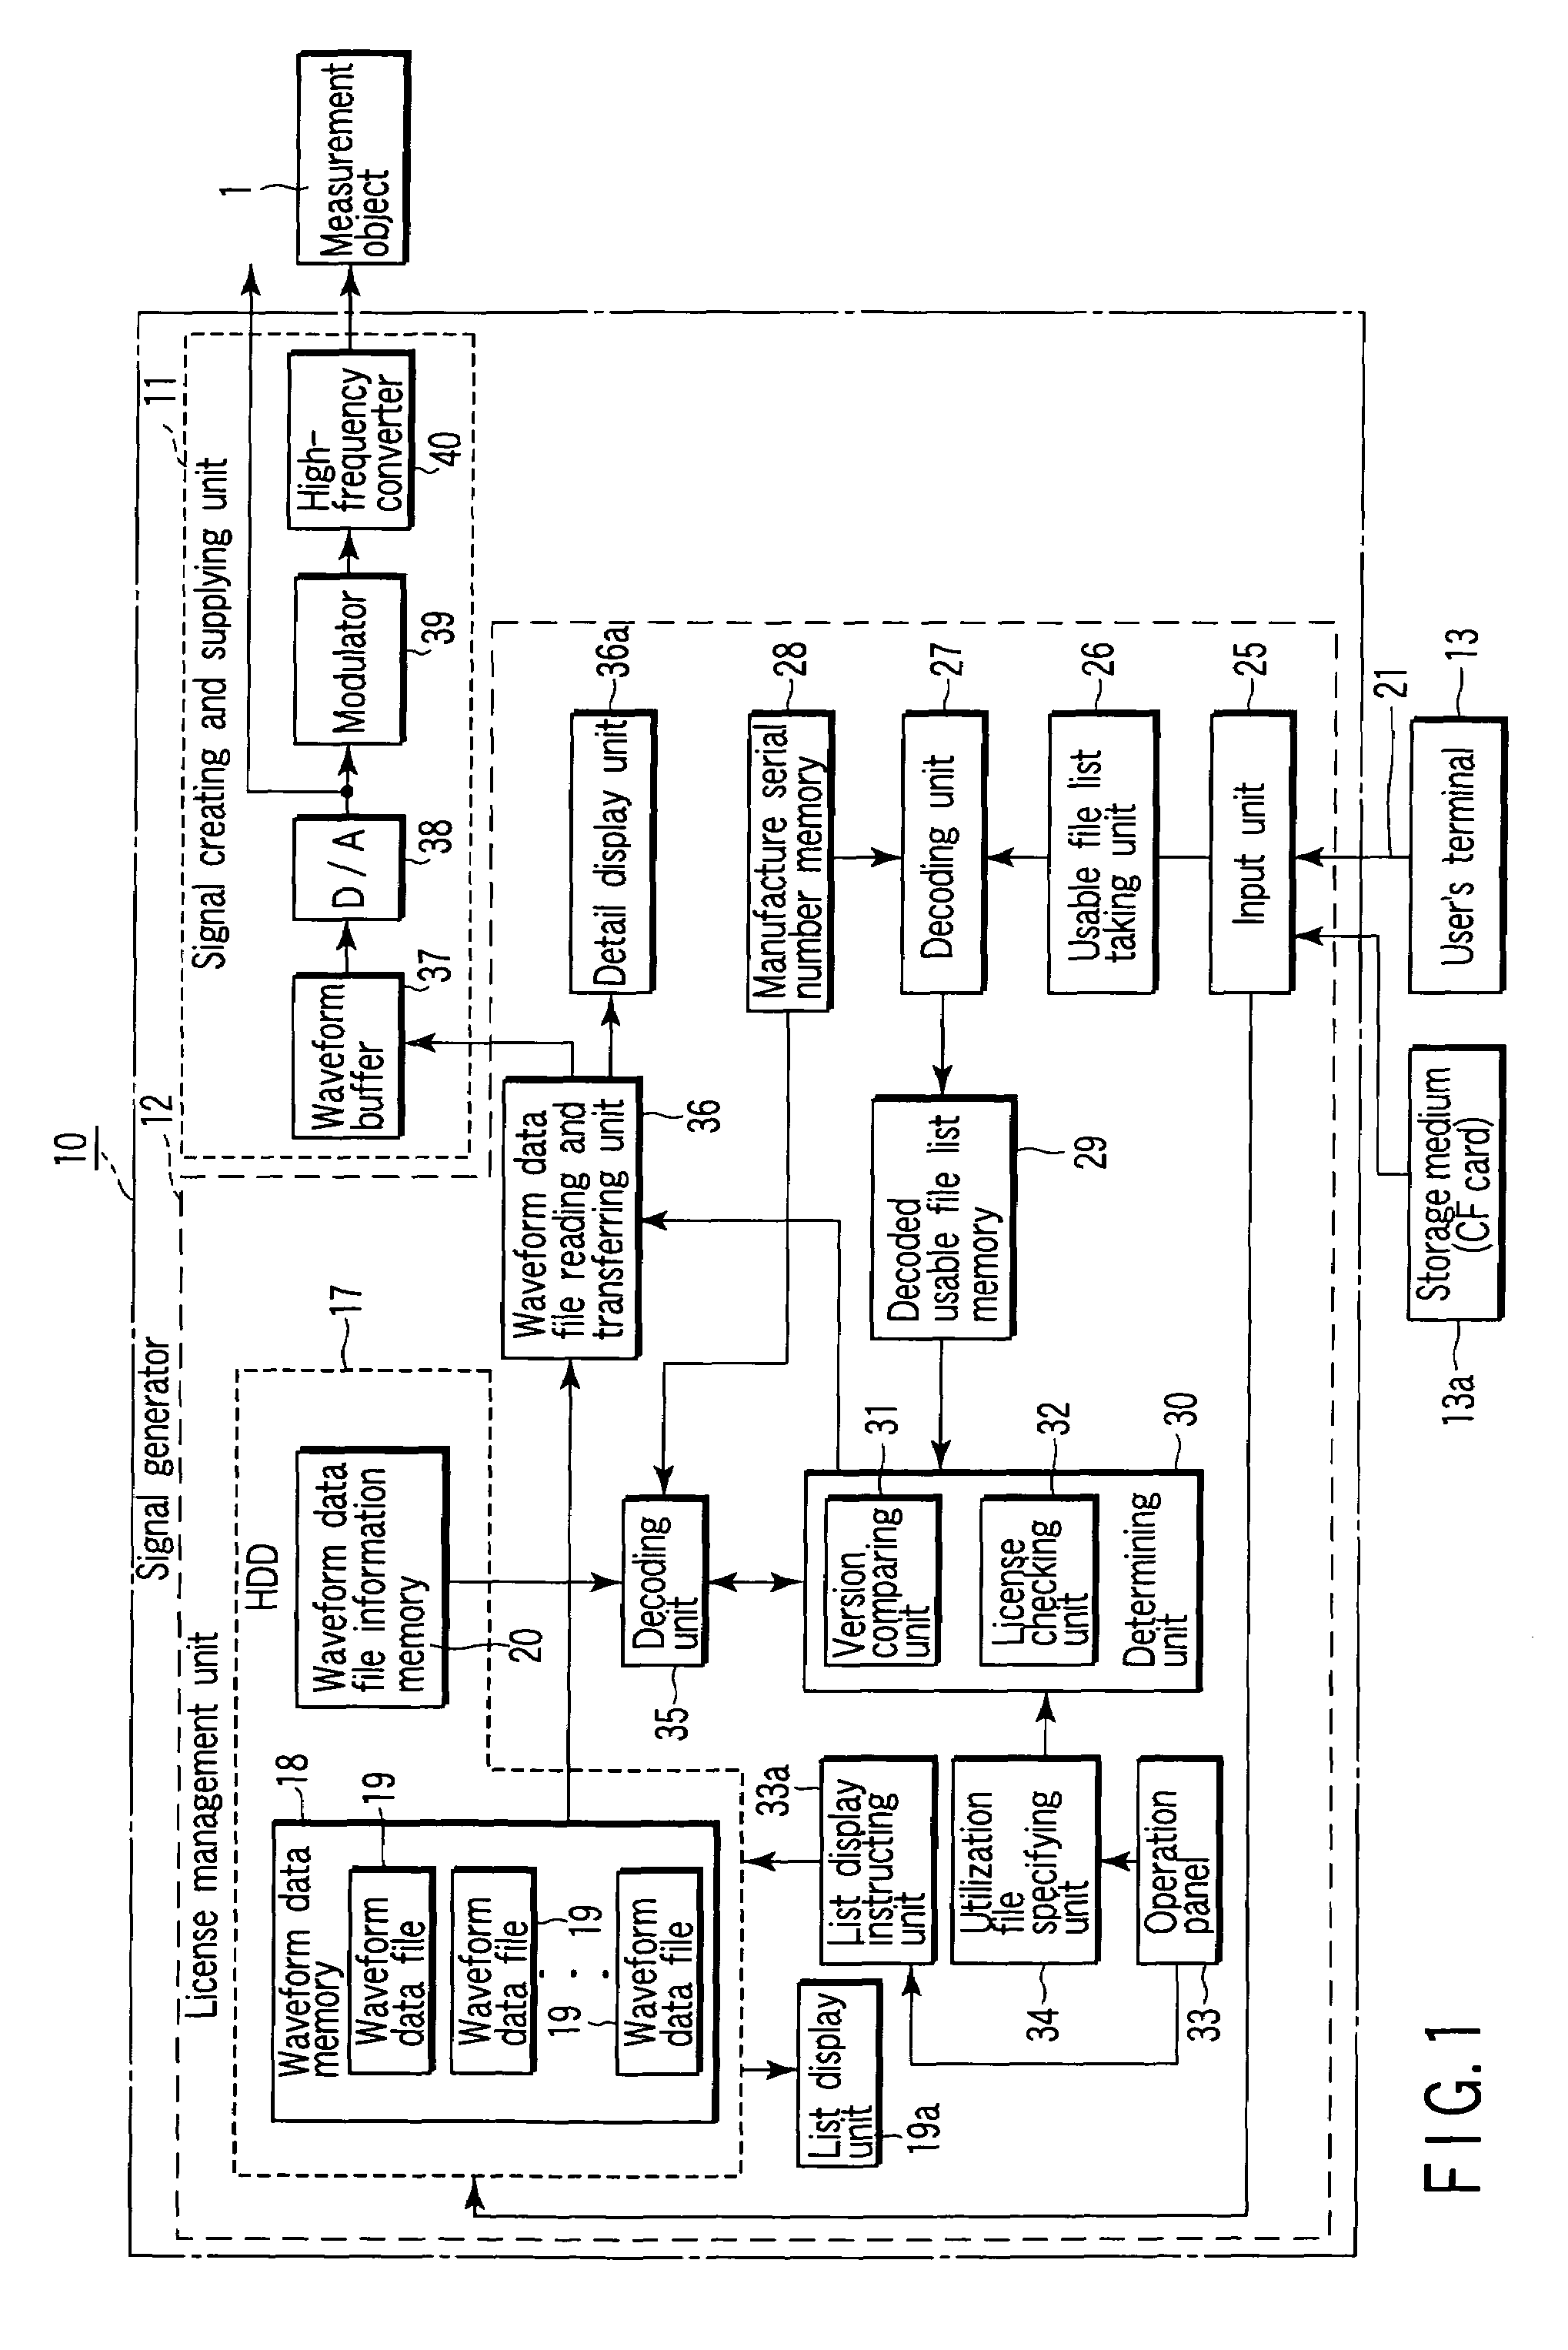 Signal generator provided with license control function and license control method thereof